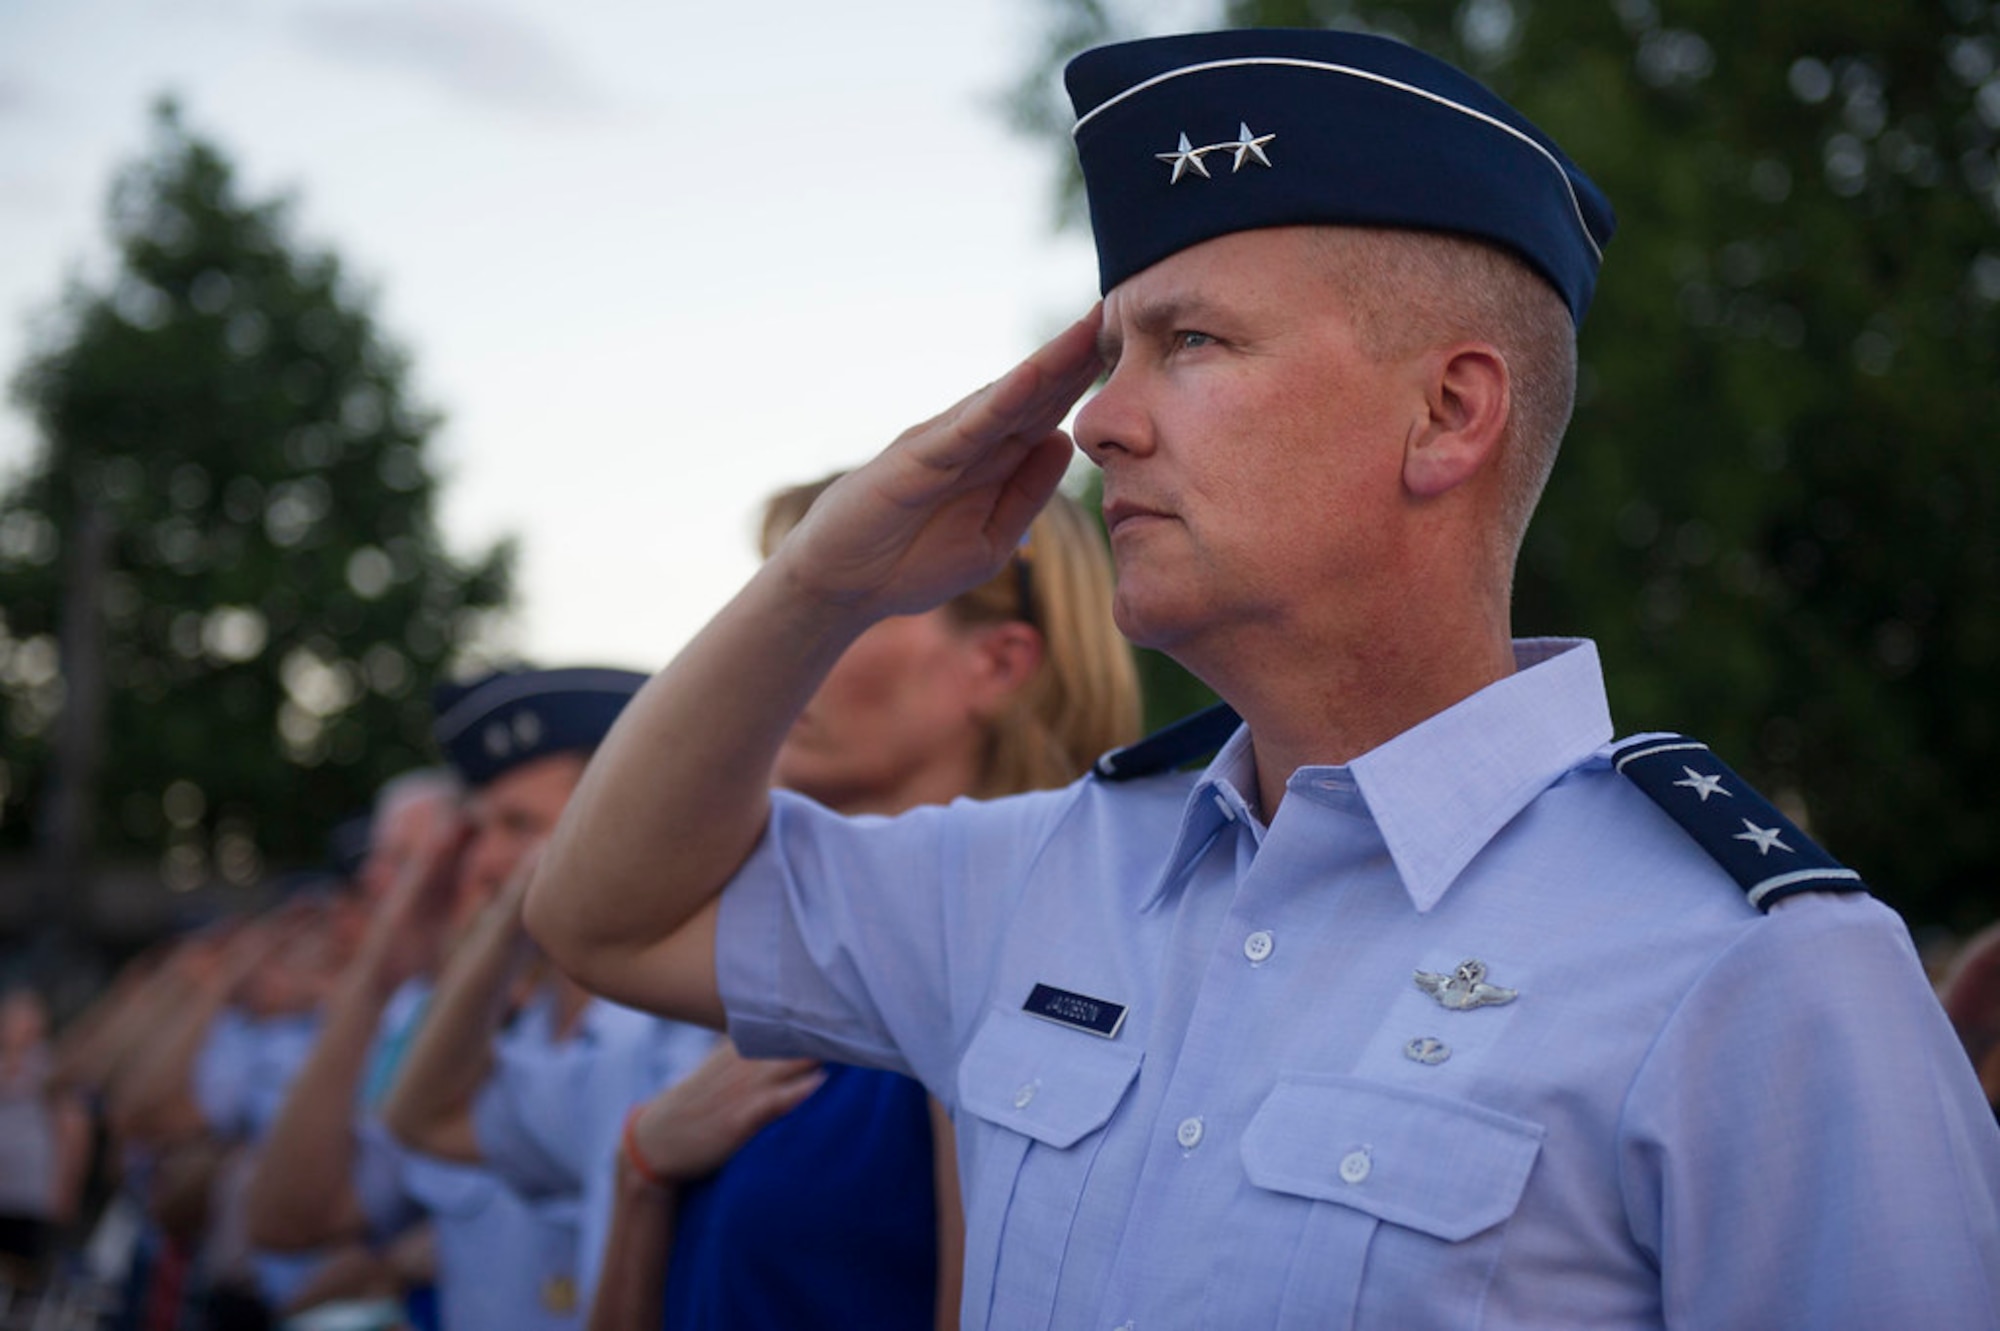 Air Force District of Washington Commander Maj. Gen. James A. Jacobson renders honors during the playing of the national anthem at the Air Force Memorial in Arlington Va., July 7, 2017 at the start of  the Heritage to Horizons concert series. U.S. Air Force Vice Chief of Staff Gen. Stephen W. Wilson hosted the event, which was the third concert of the series. The Heritage to Horizons concerts are a recurring public ceremonial event that takes place at the Air Force Memorial and honor those who support the Air Force. The theme of the third concert was Airmen who Broke Barriers. (U.S. Air Force Photo by Senior Master Sgt. Adrian Cadiz)(Released)